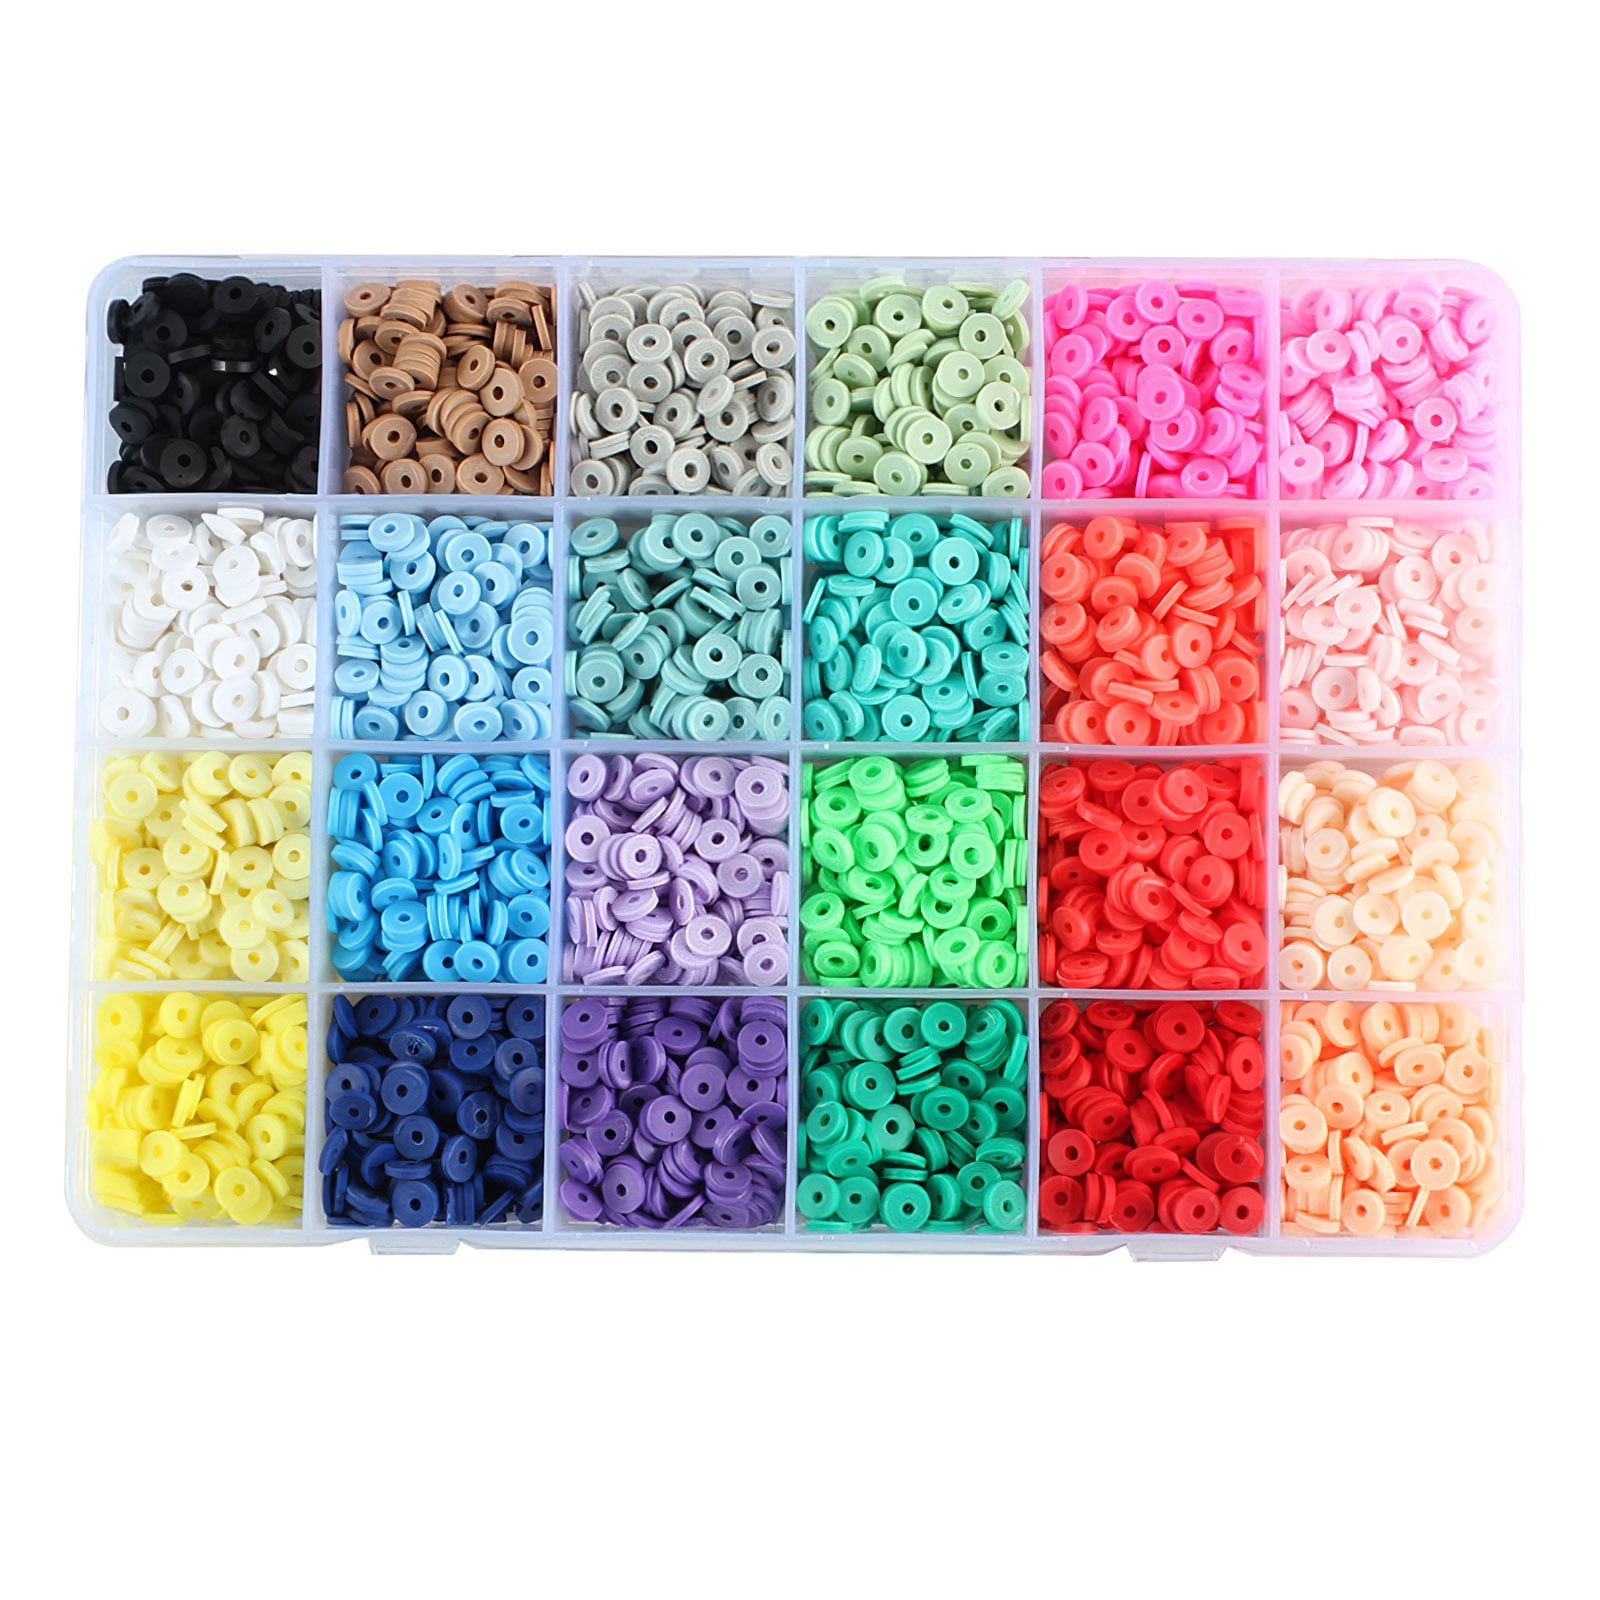 720 Pieces Beads Kit,15 Grids Spacer Beads Set,Round Beads Star